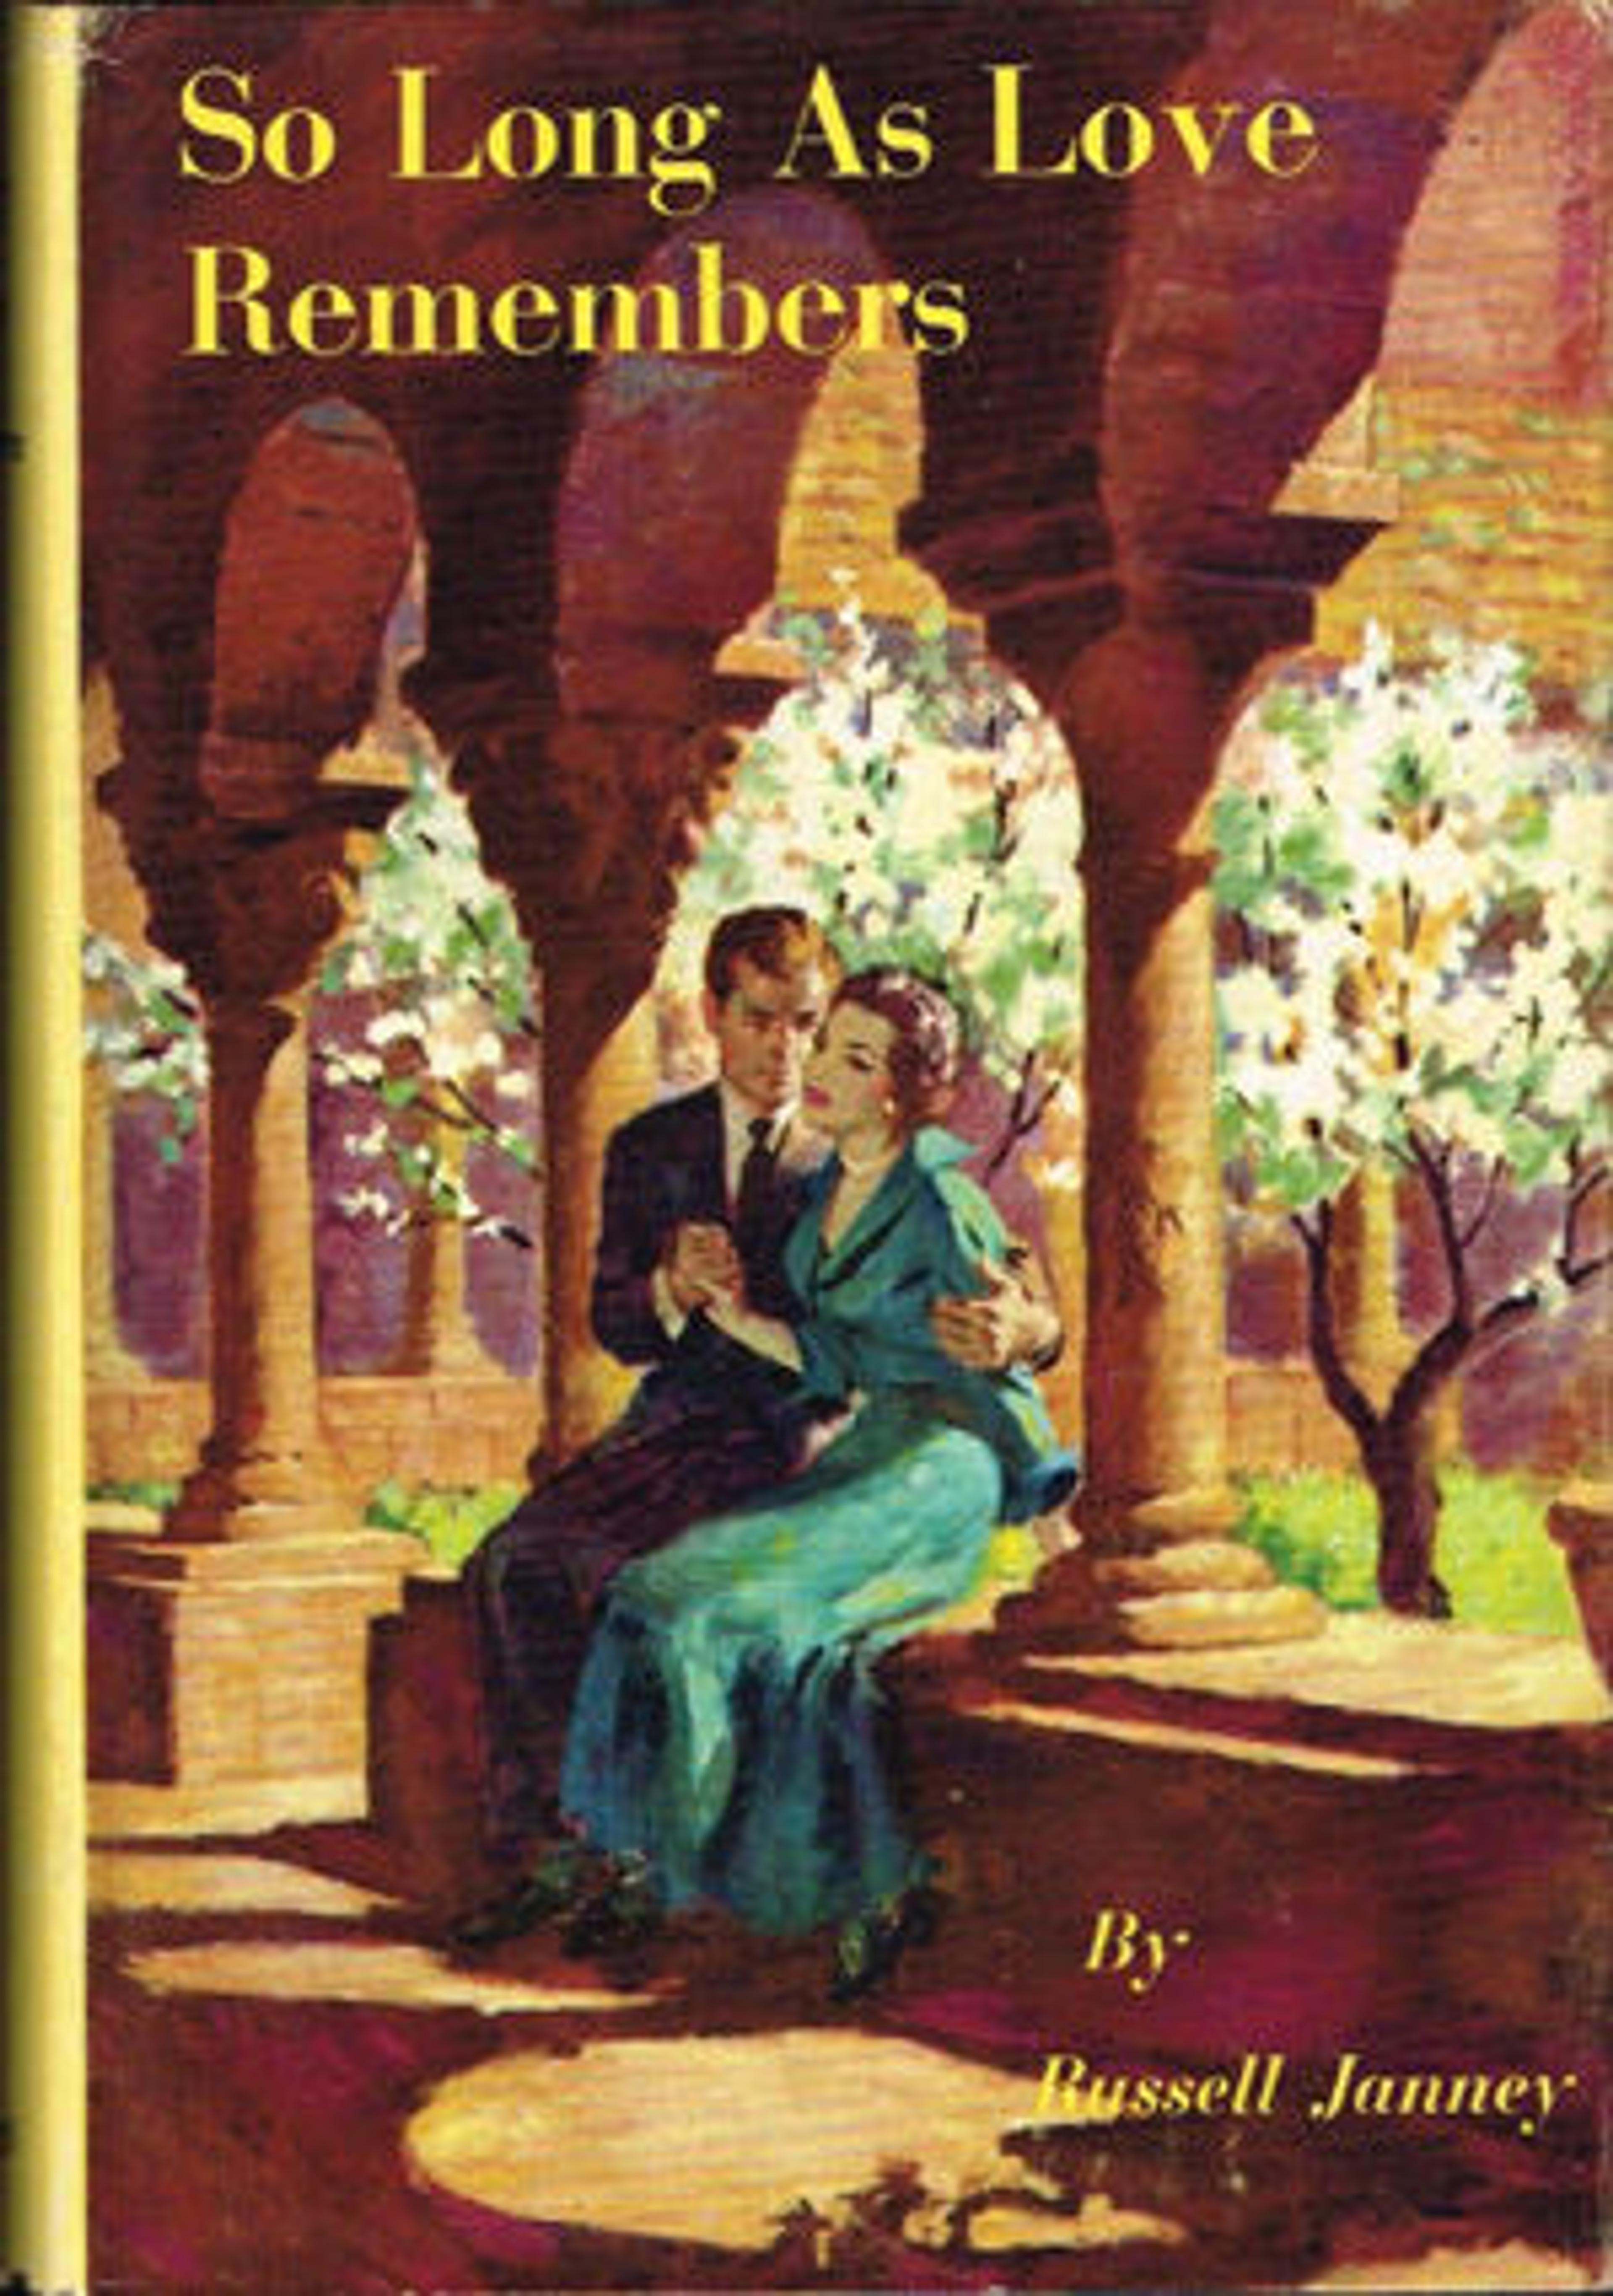 7.	Jacket illustration for So Long As Love Remembers by Russell Janney (New York: Hermitage House, 1953) featuring the Cloister from Saint-Michel-de-Cuxa (25.120.398–.954), though here apparently constructed of brick instead of pink marble.